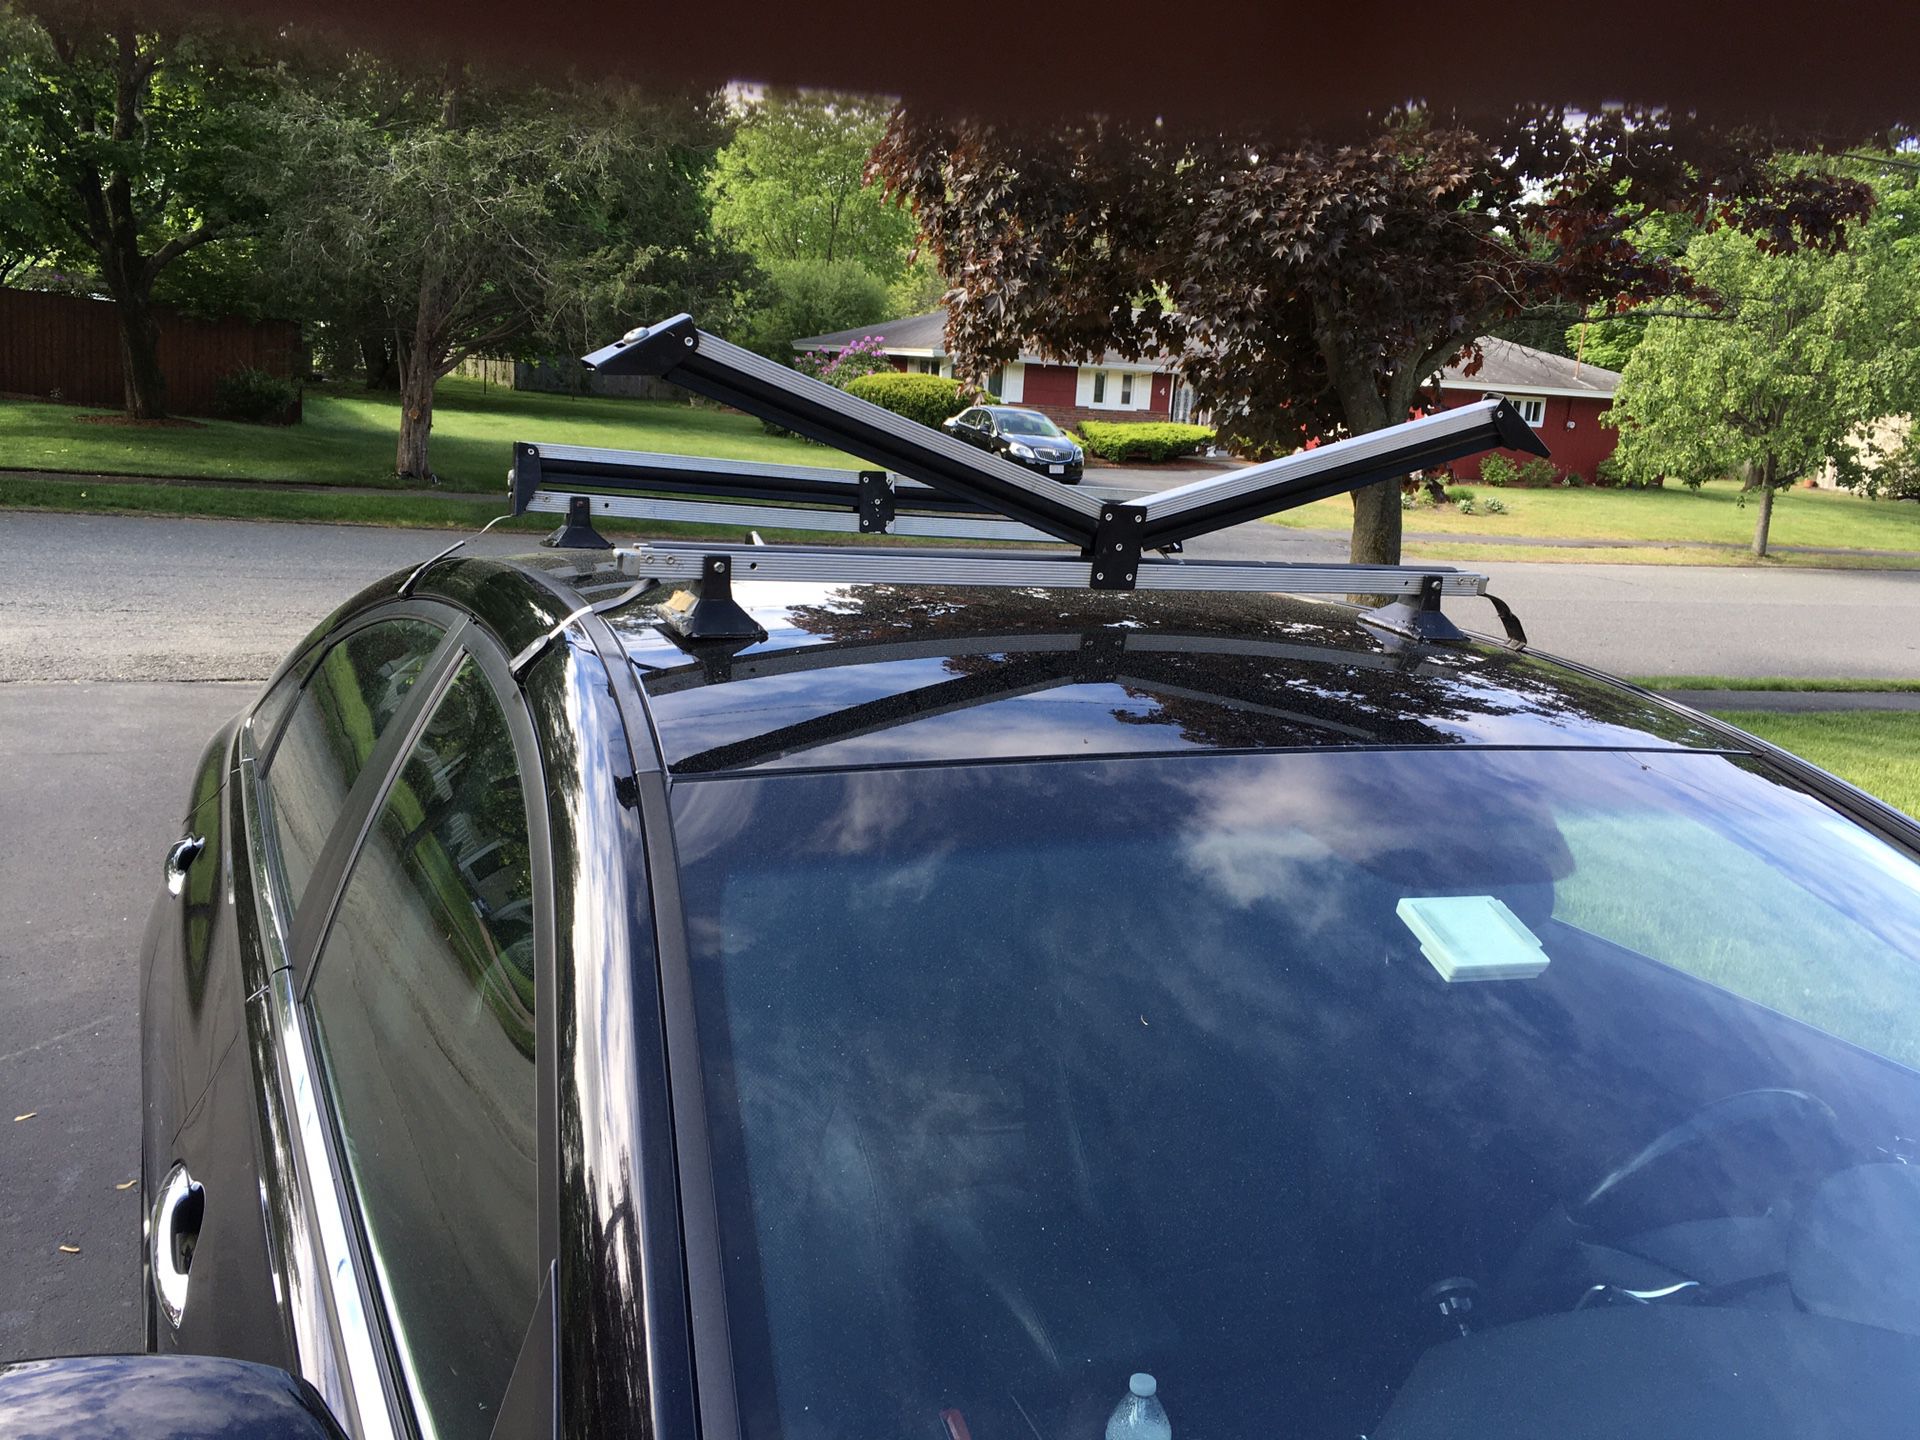 Universal fit ski carrier